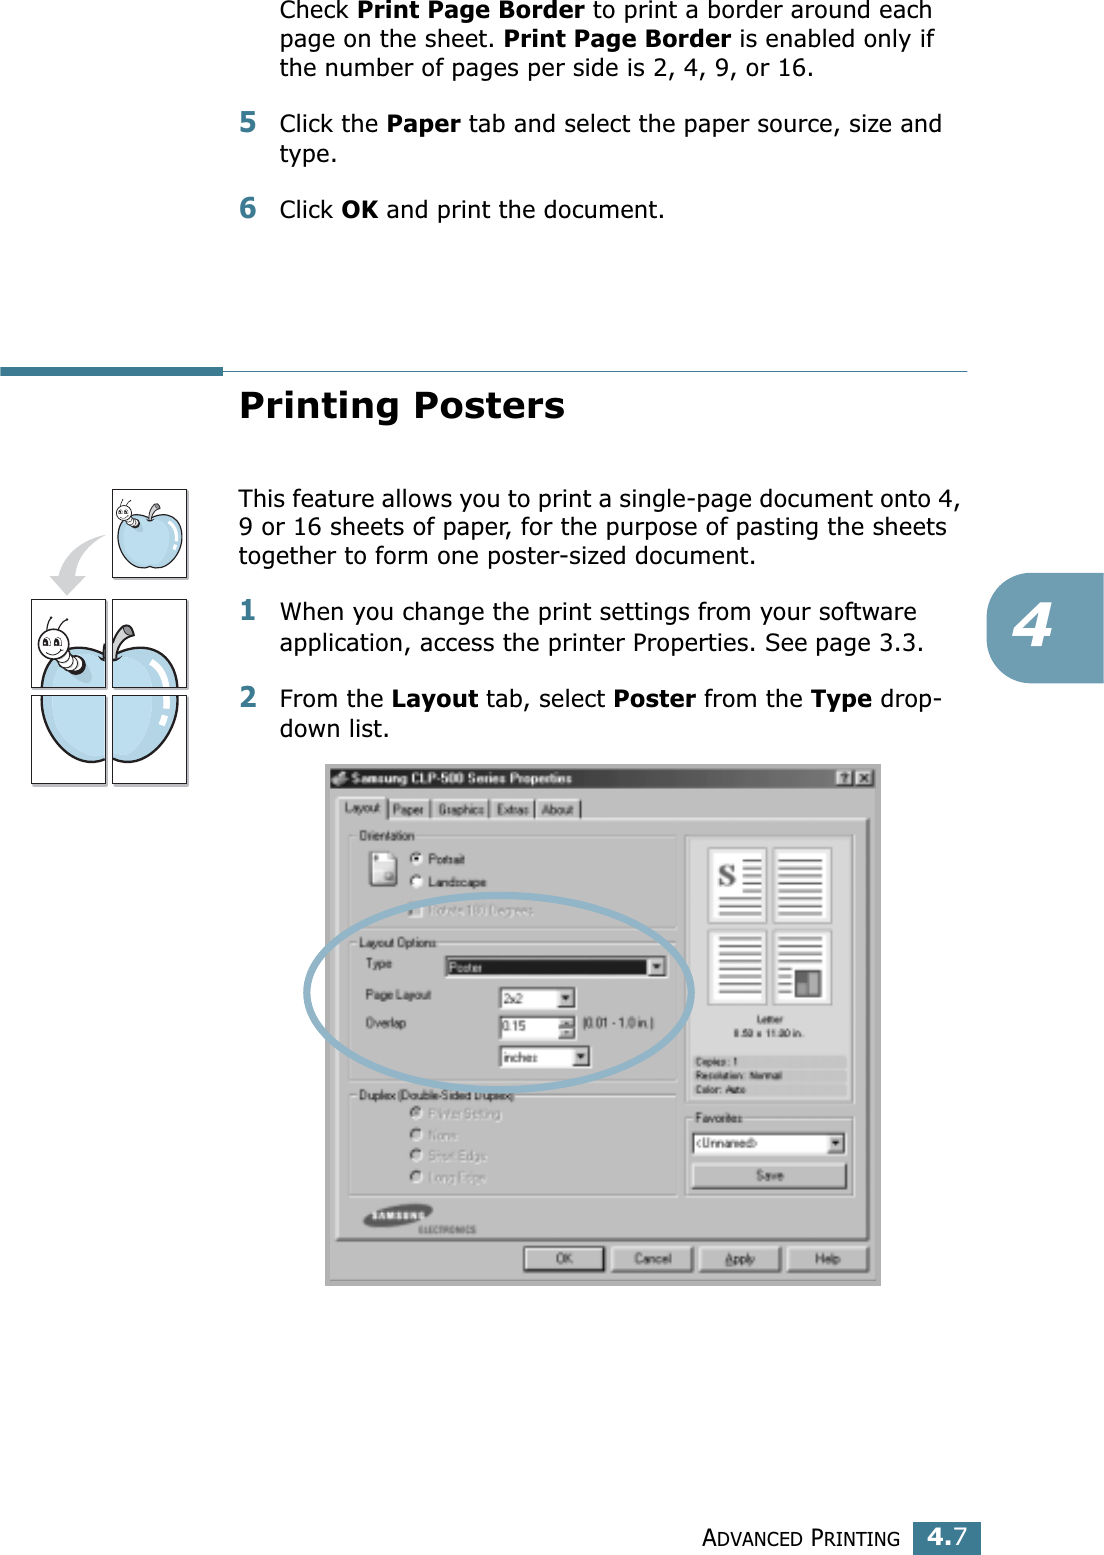 ADVANCED PRINTING4.74Check Print Page Border to print a border around each page on the sheet. Print Page Border is enabled only if the number of pages per side is 2, 4, 9, or 16.5Click the Paper tab and select the paper source, size and type.6Click OK and print the document. Printing PostersThis feature allows you to print a single-page document onto 4, 9 or 16 sheets of paper, for the purpose of pasting the sheets together to form one poster-sized document.1When you change the print settings from your software application, access the printer Properties. See page 3.3.2From the Layout tab, select Poster from the Type drop-down list. 